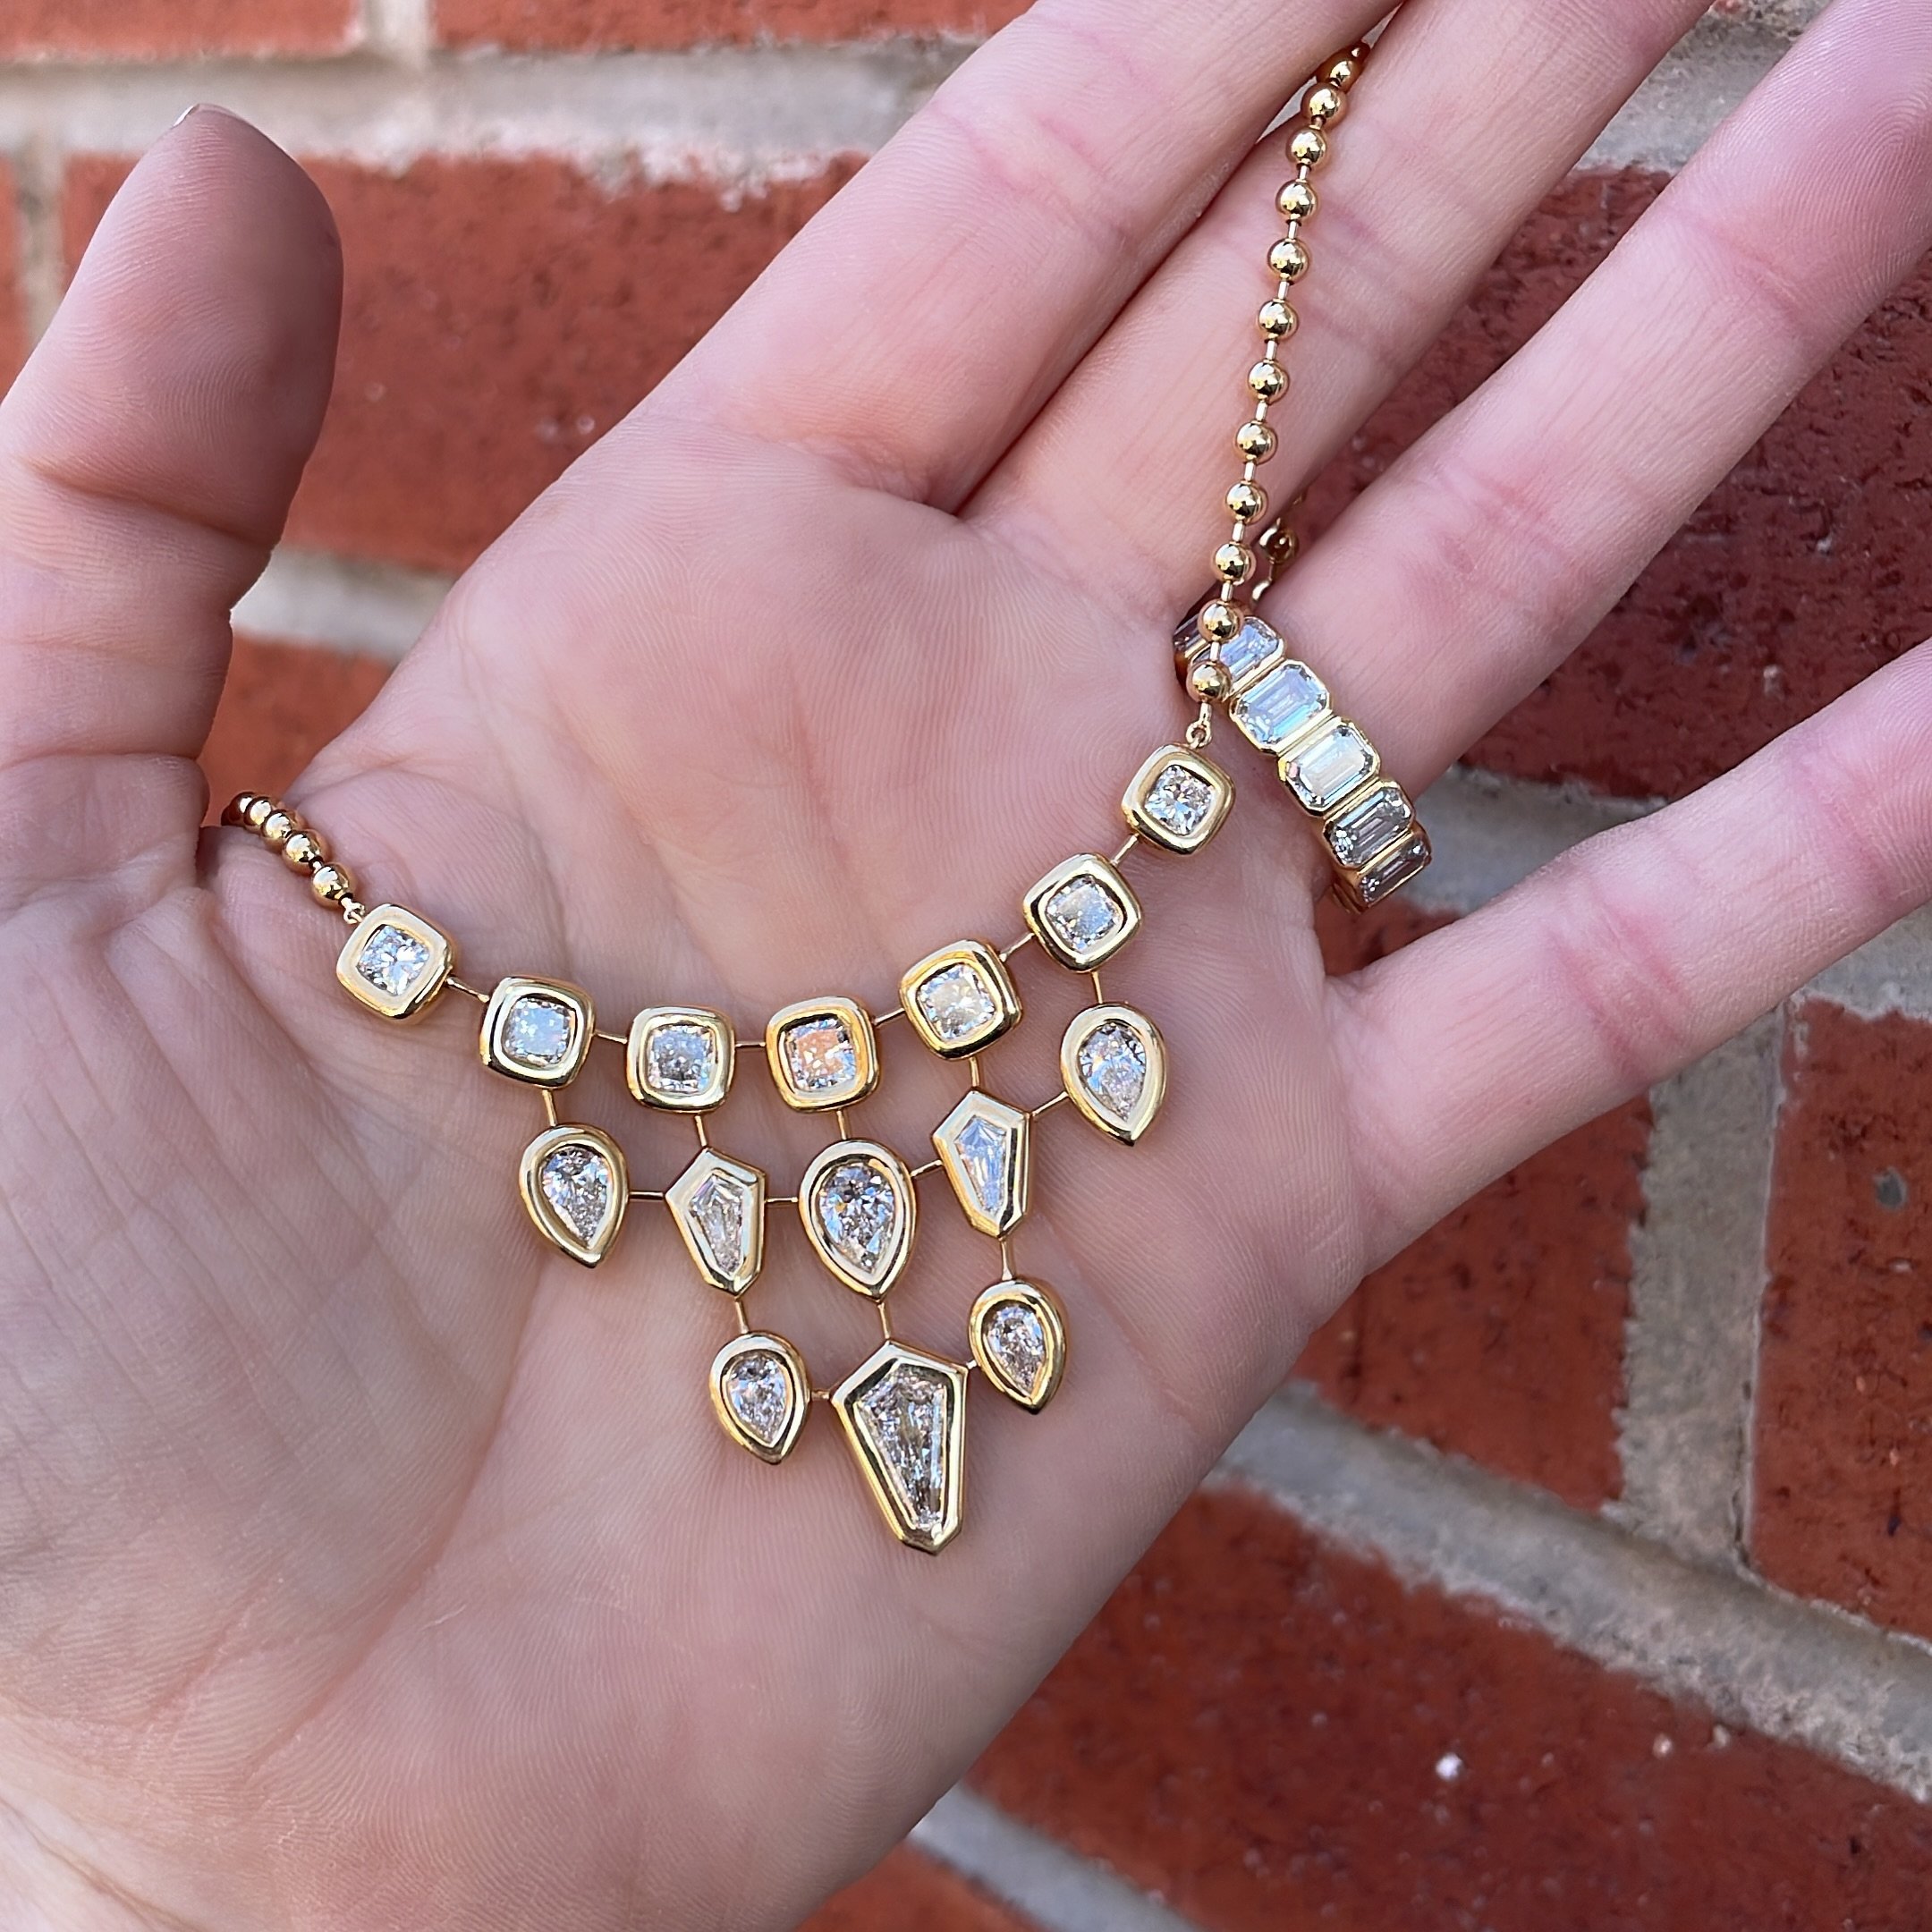 Bringing the ice to Aspen&hellip; There has only been one other diamond bib from Brent. Who will be the lucky owner of this one! It&rsquo;s truly unreal #etcessentials #etcaspen #etcbirmingham #brentnealejewelry